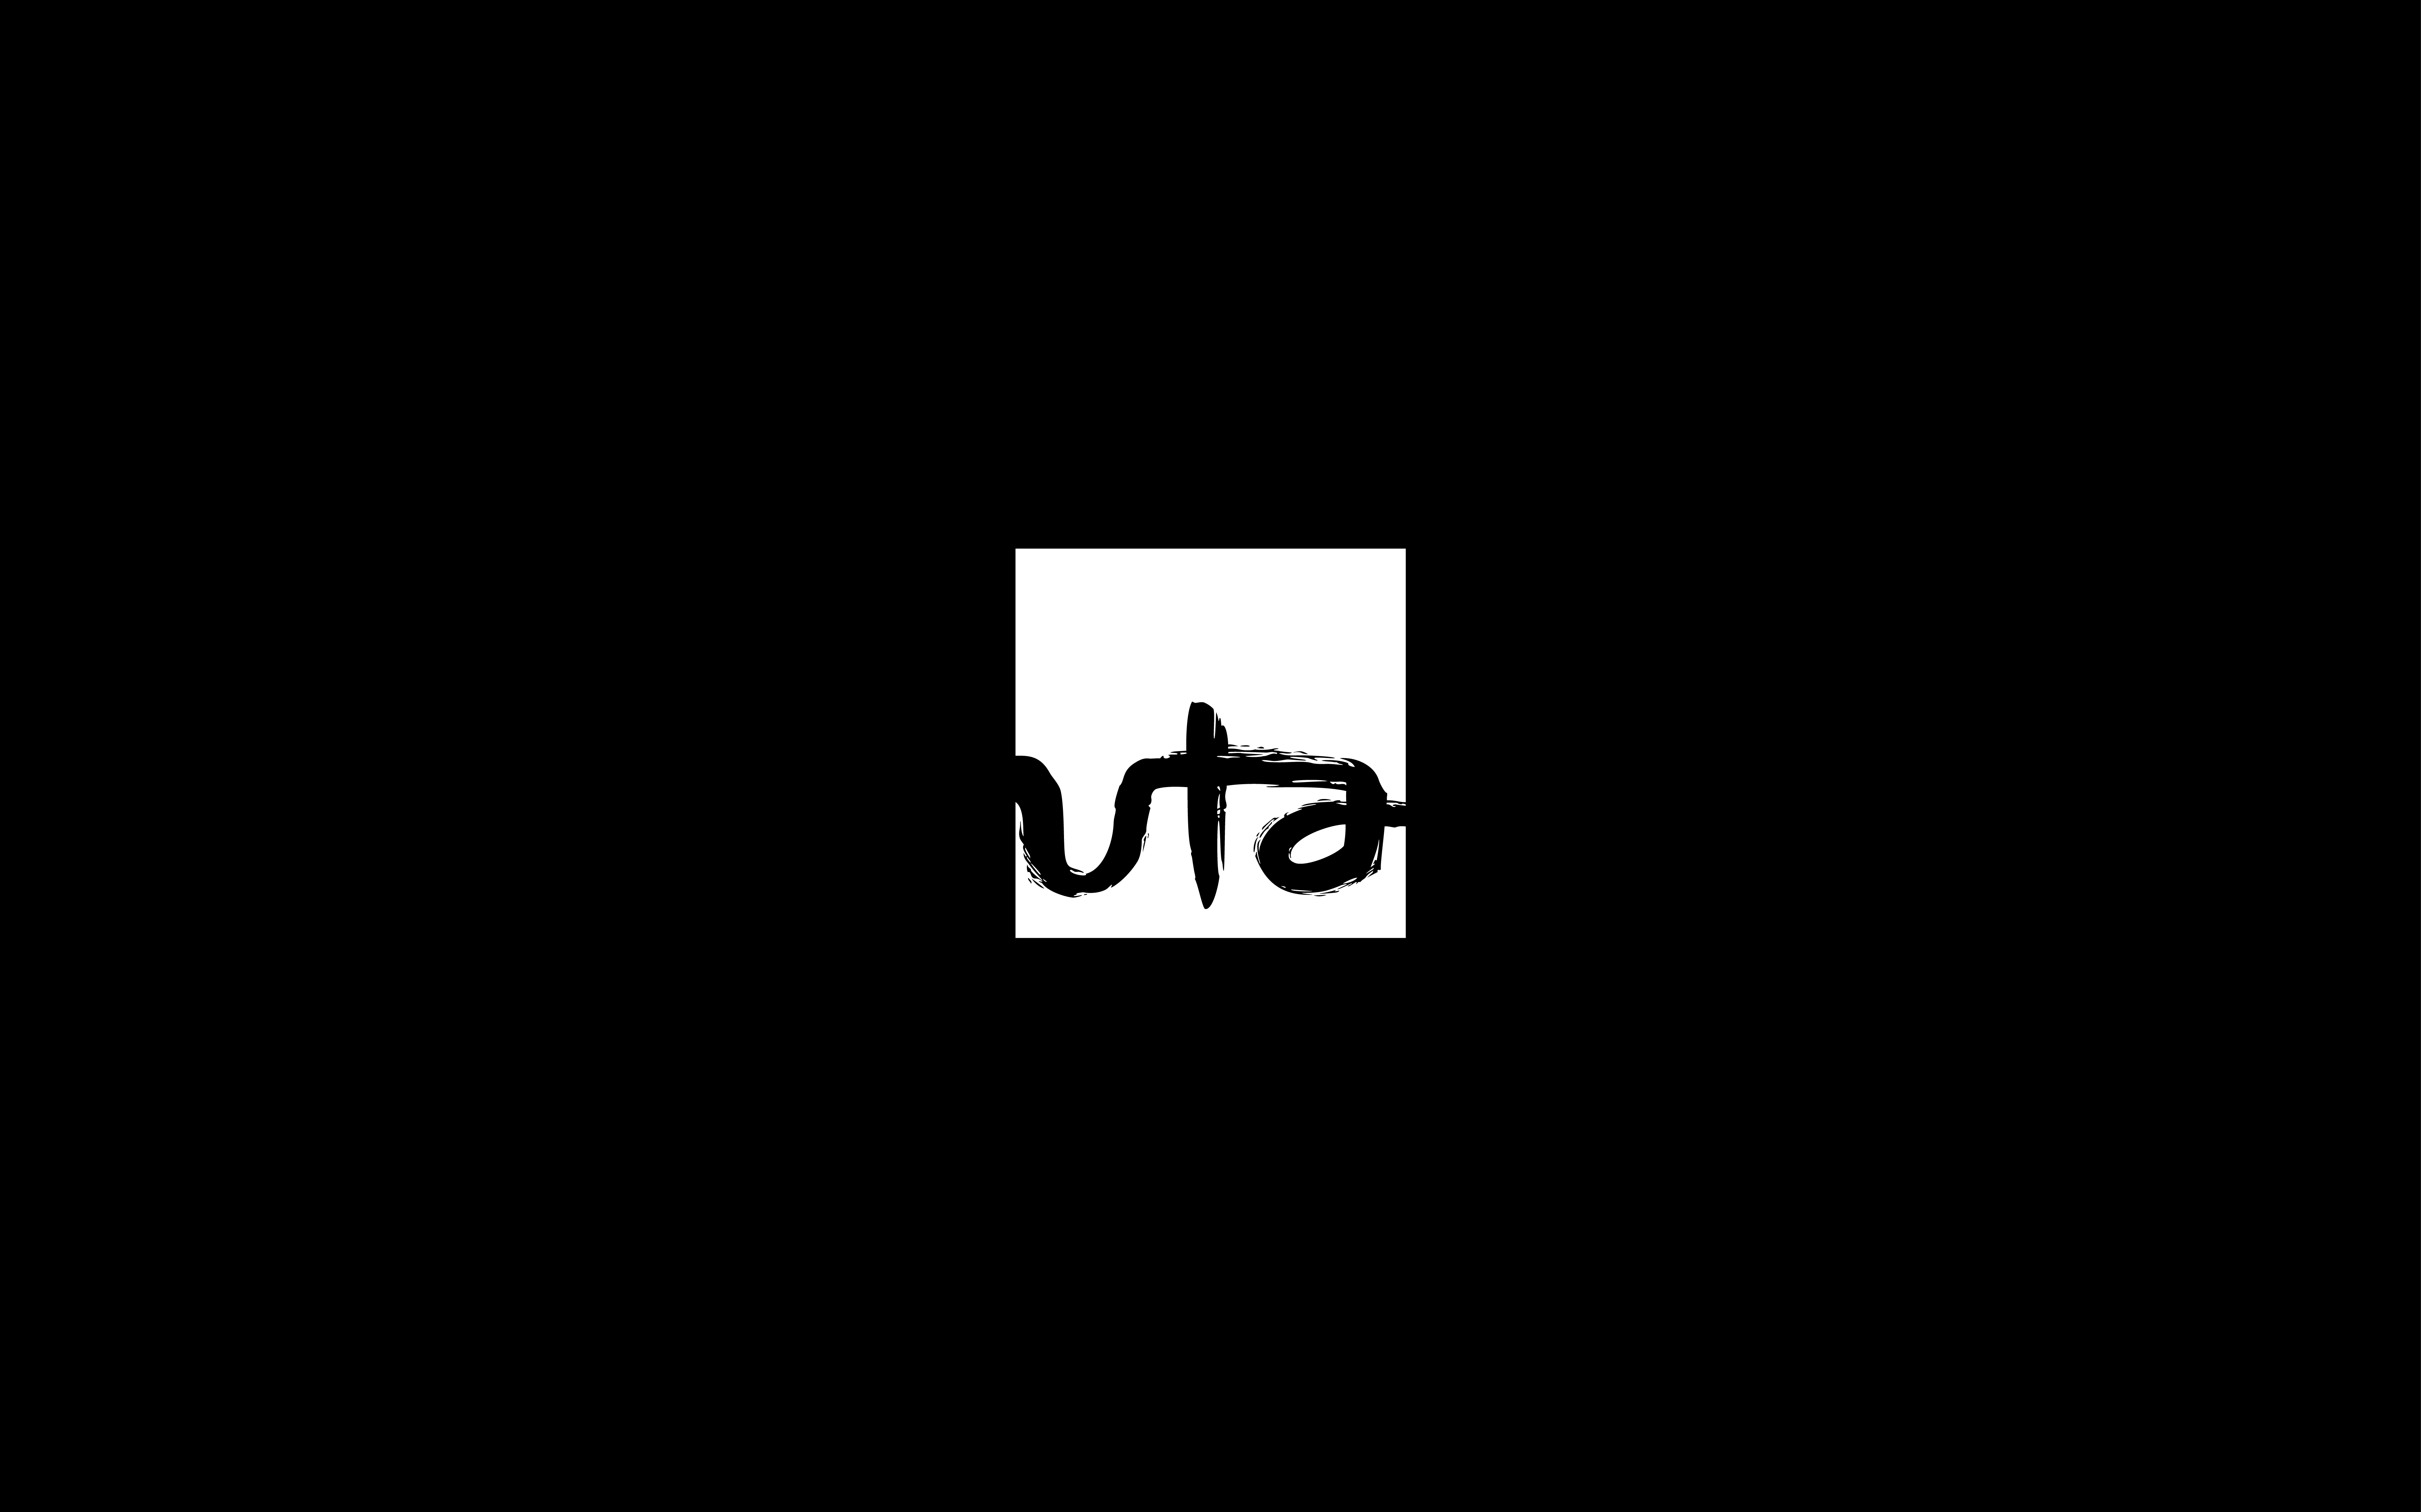 New Logo and Identity for UTA done In-house